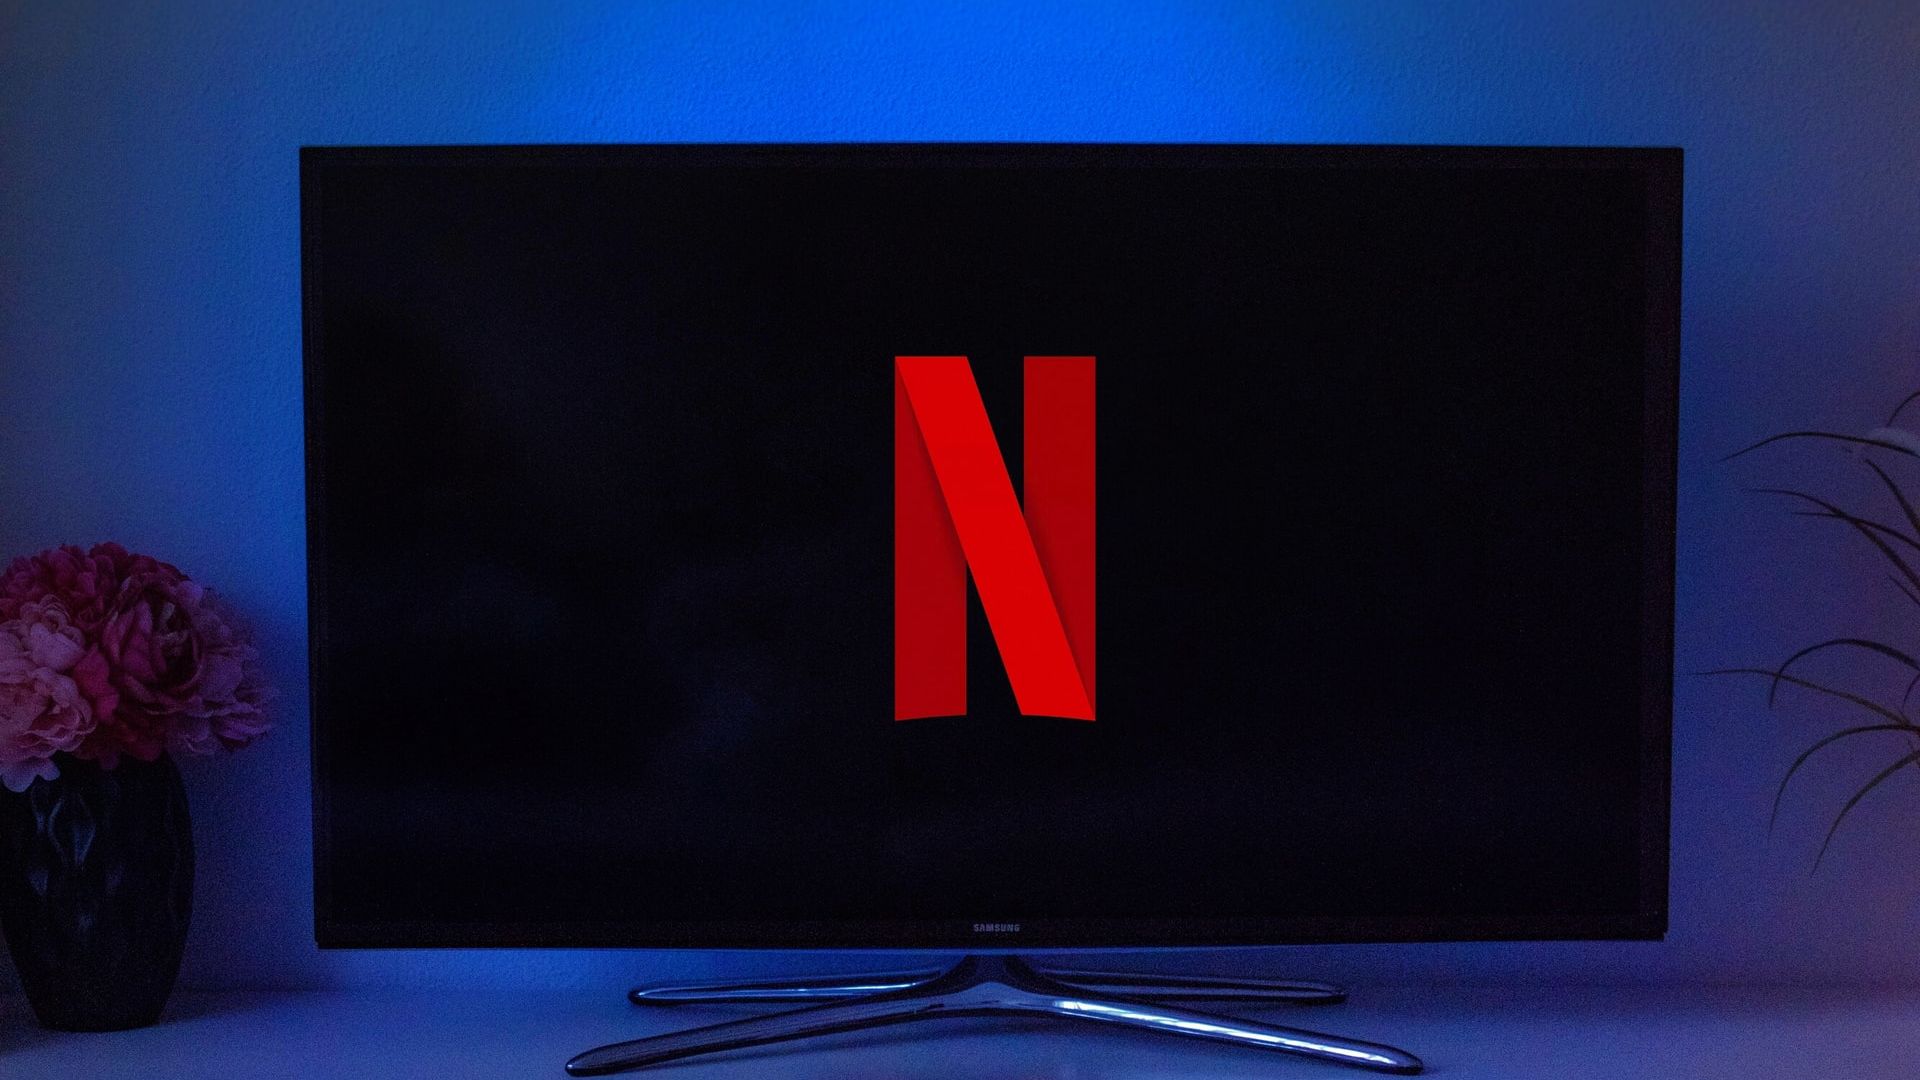 Netflix: Users who do not own an account will be locked out on a trial basis

